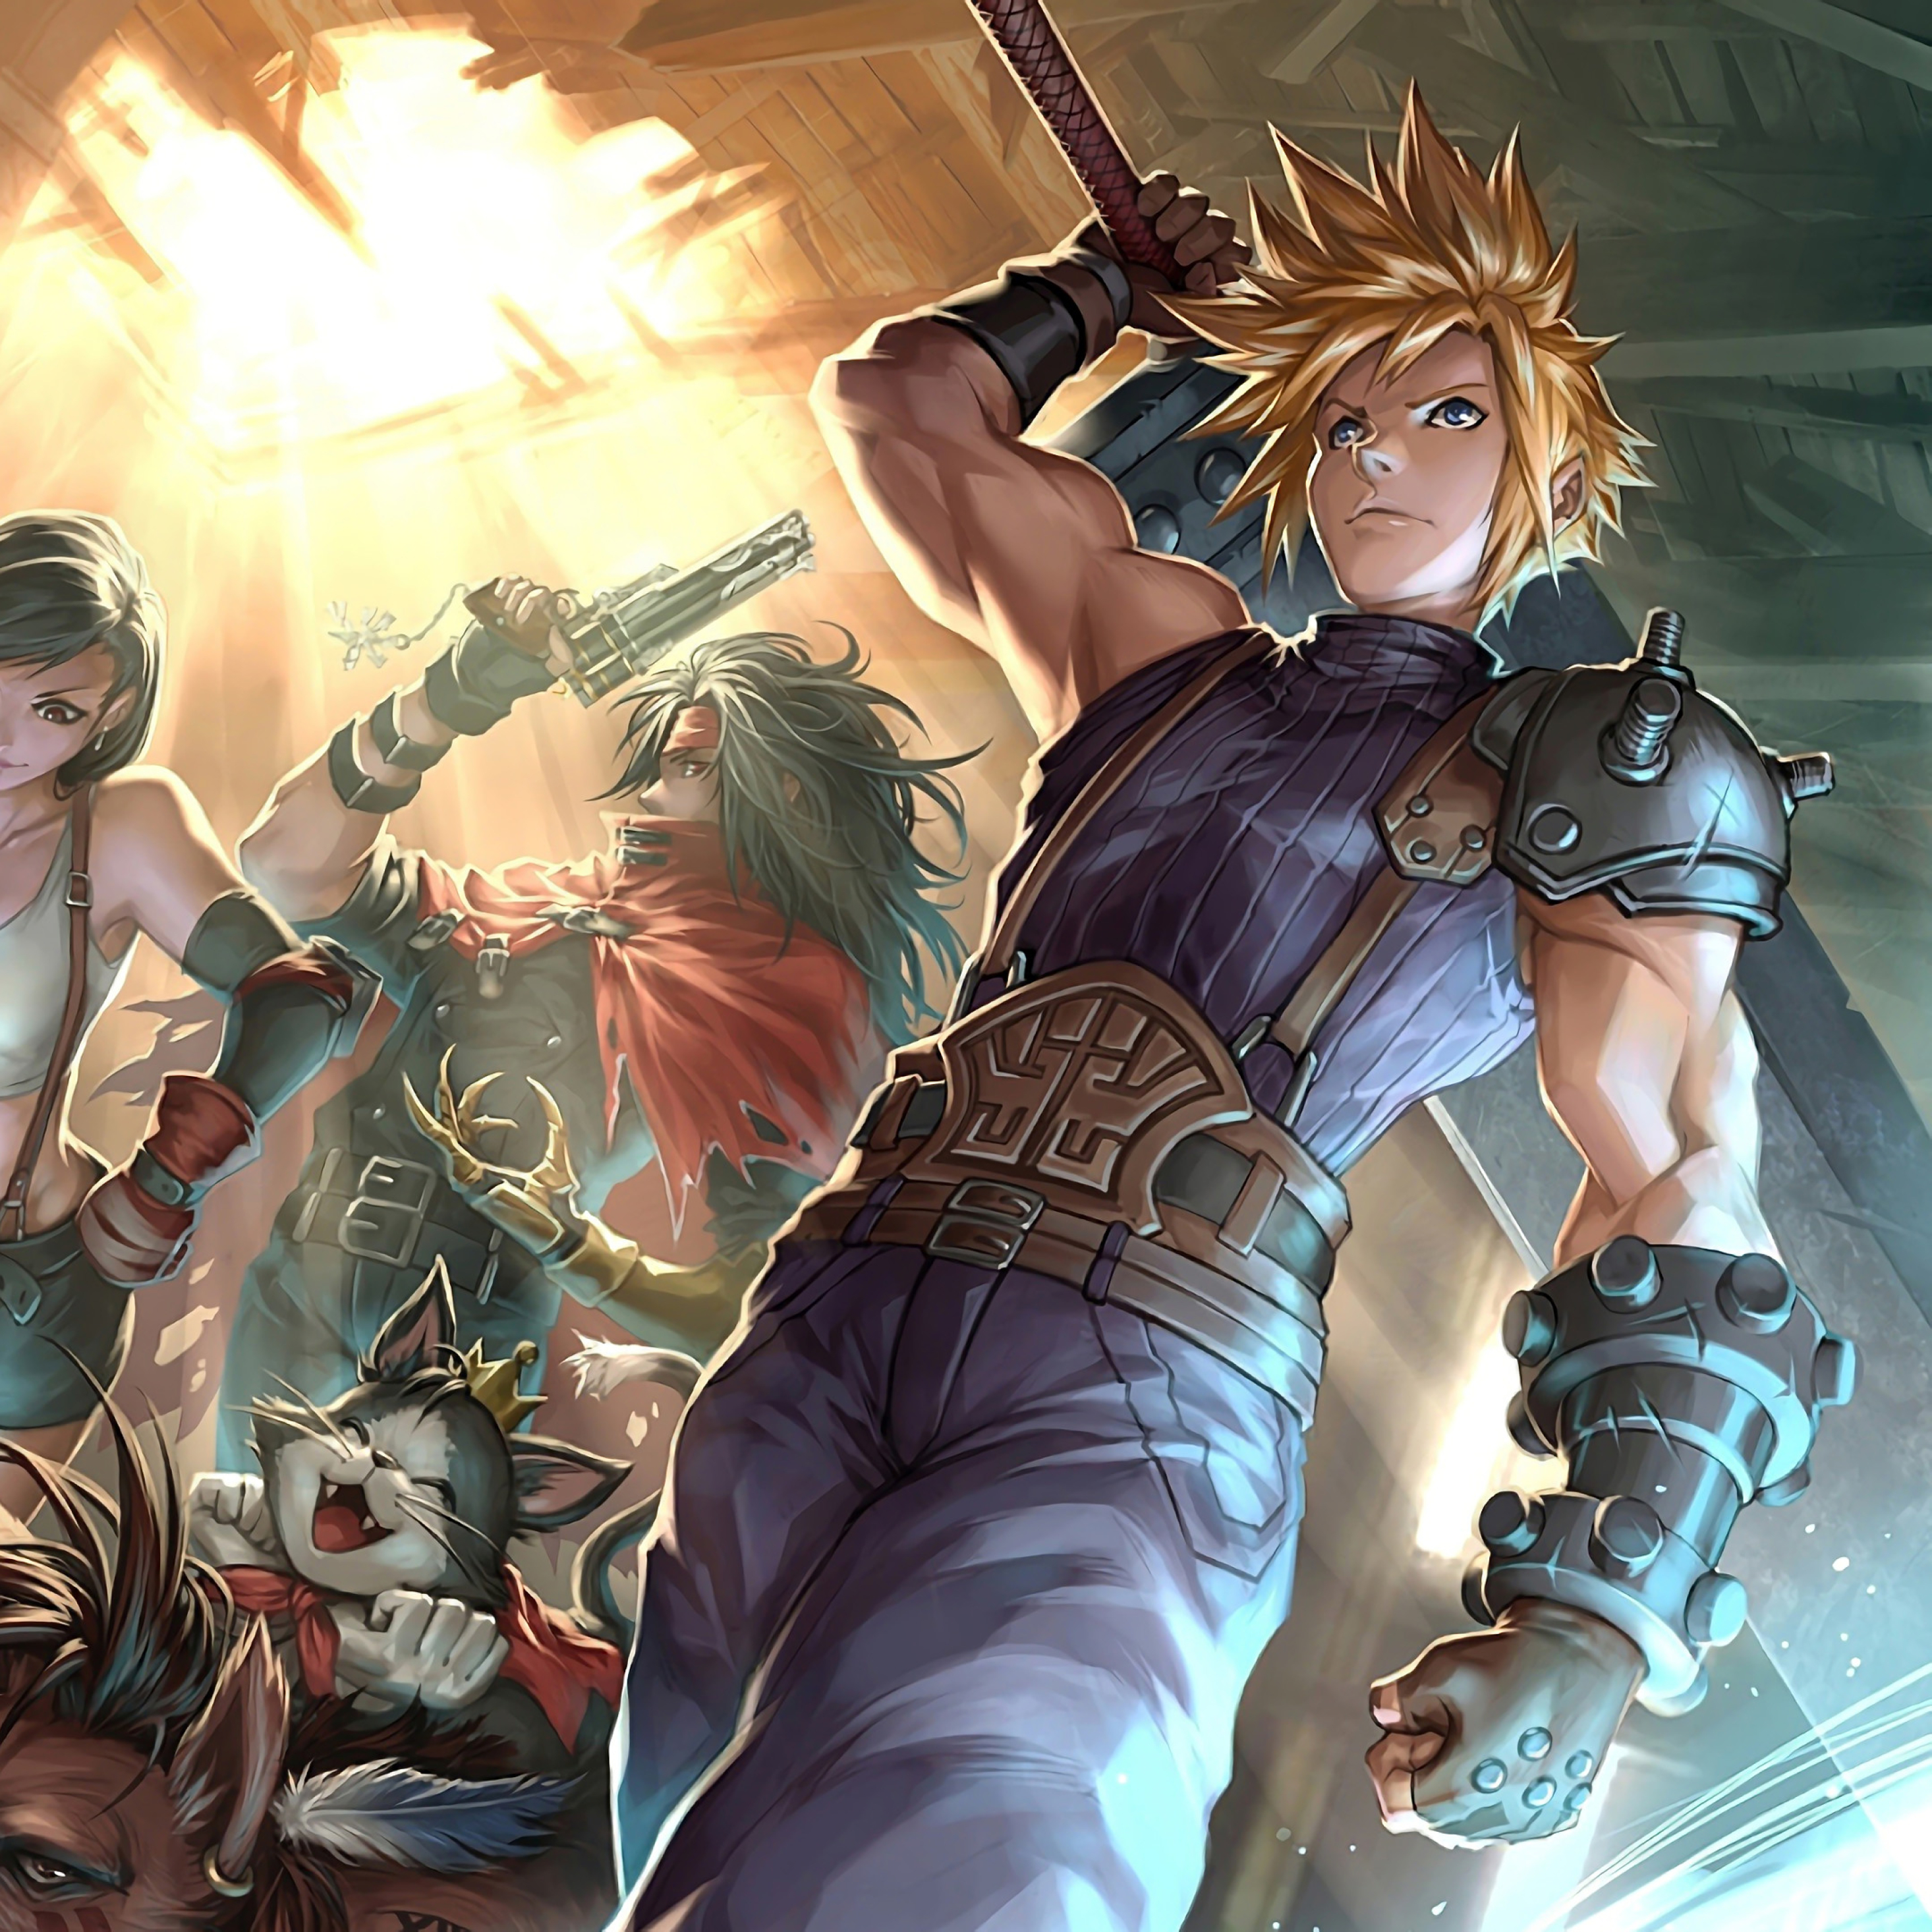 2932x2932 Final Fantasy Vii 4k Ipad Pro Retina Display Wallpaper Hd Games 4k Wallpapers Images Photos And Background Wallpapers Den